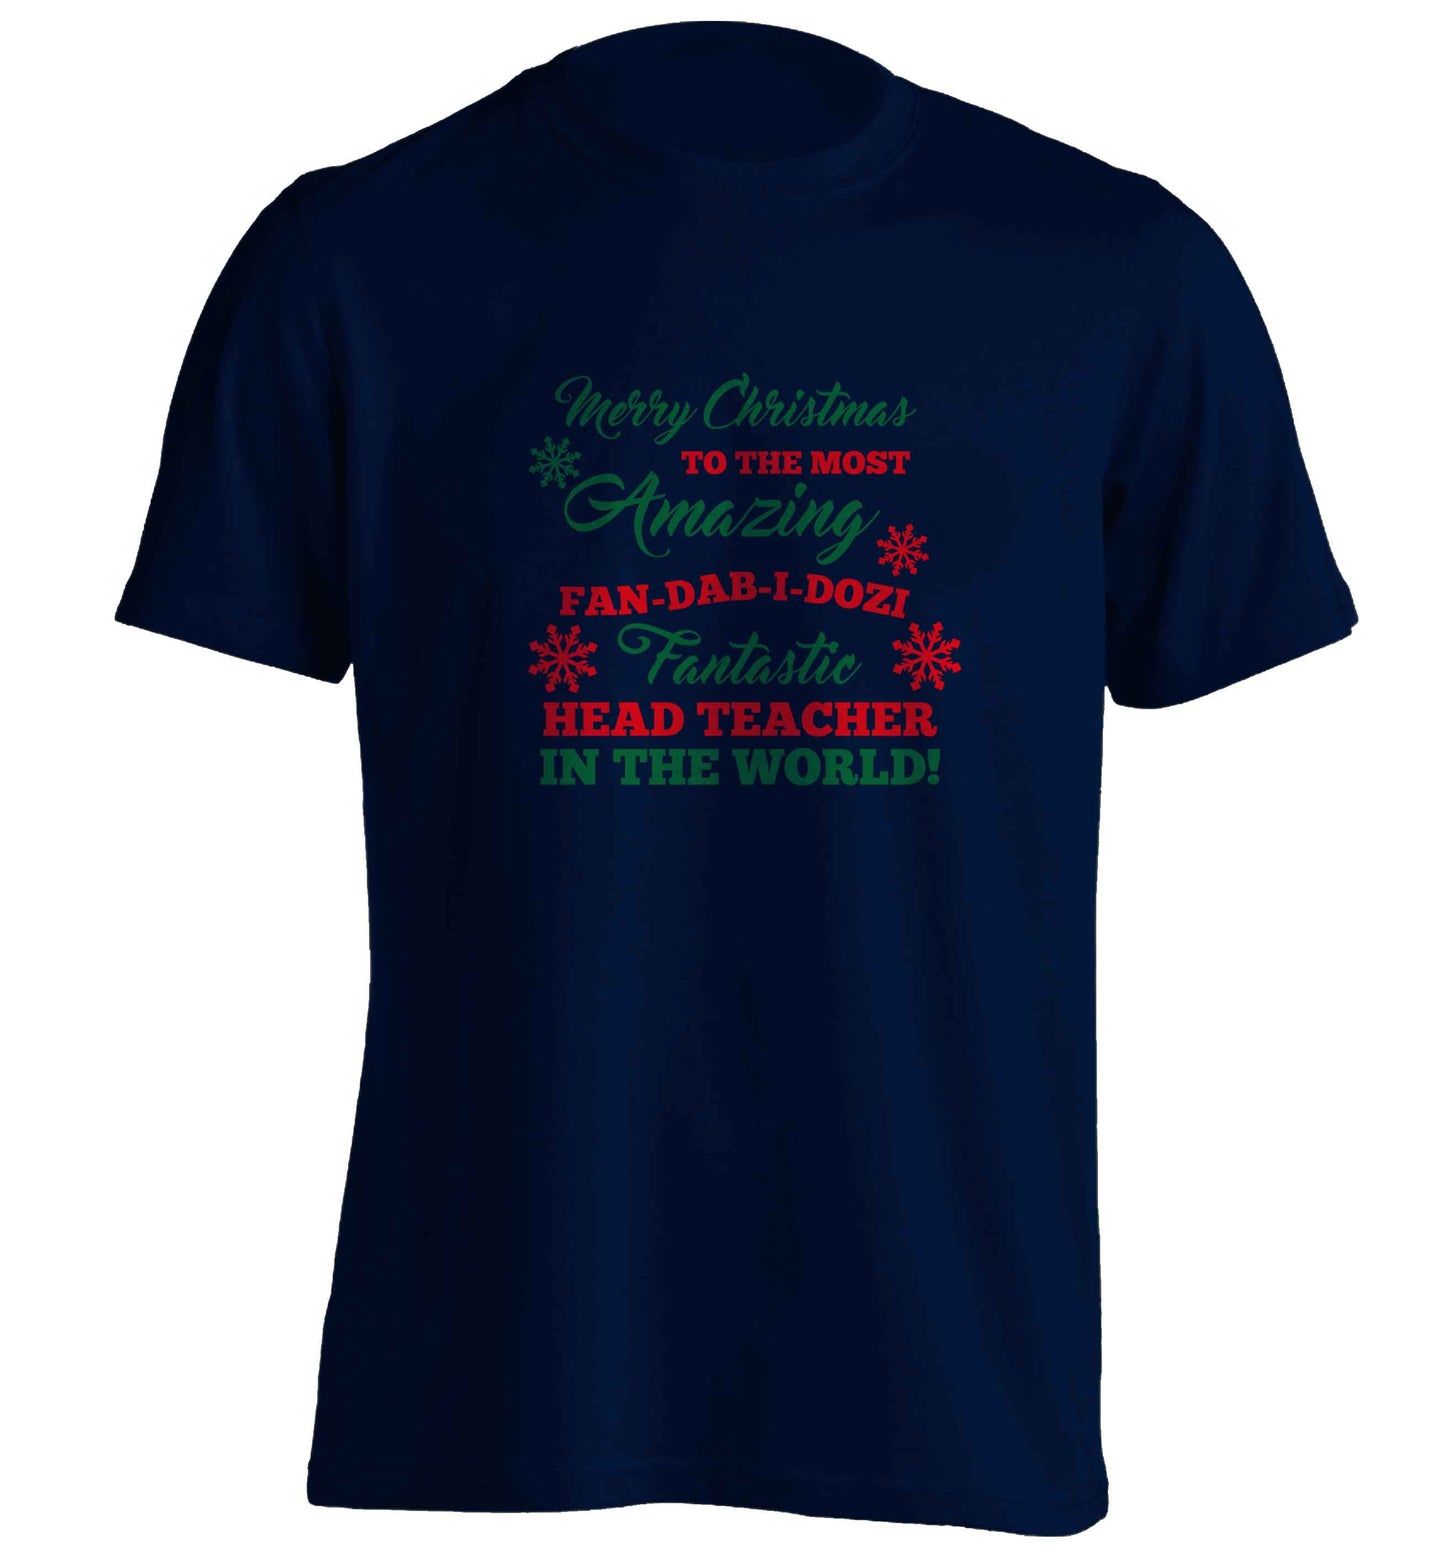 Merry Christmas to the most amazing fan-dab-i-dozi fantasic head teacher in the world adults unisex navy Tshirt 2XL